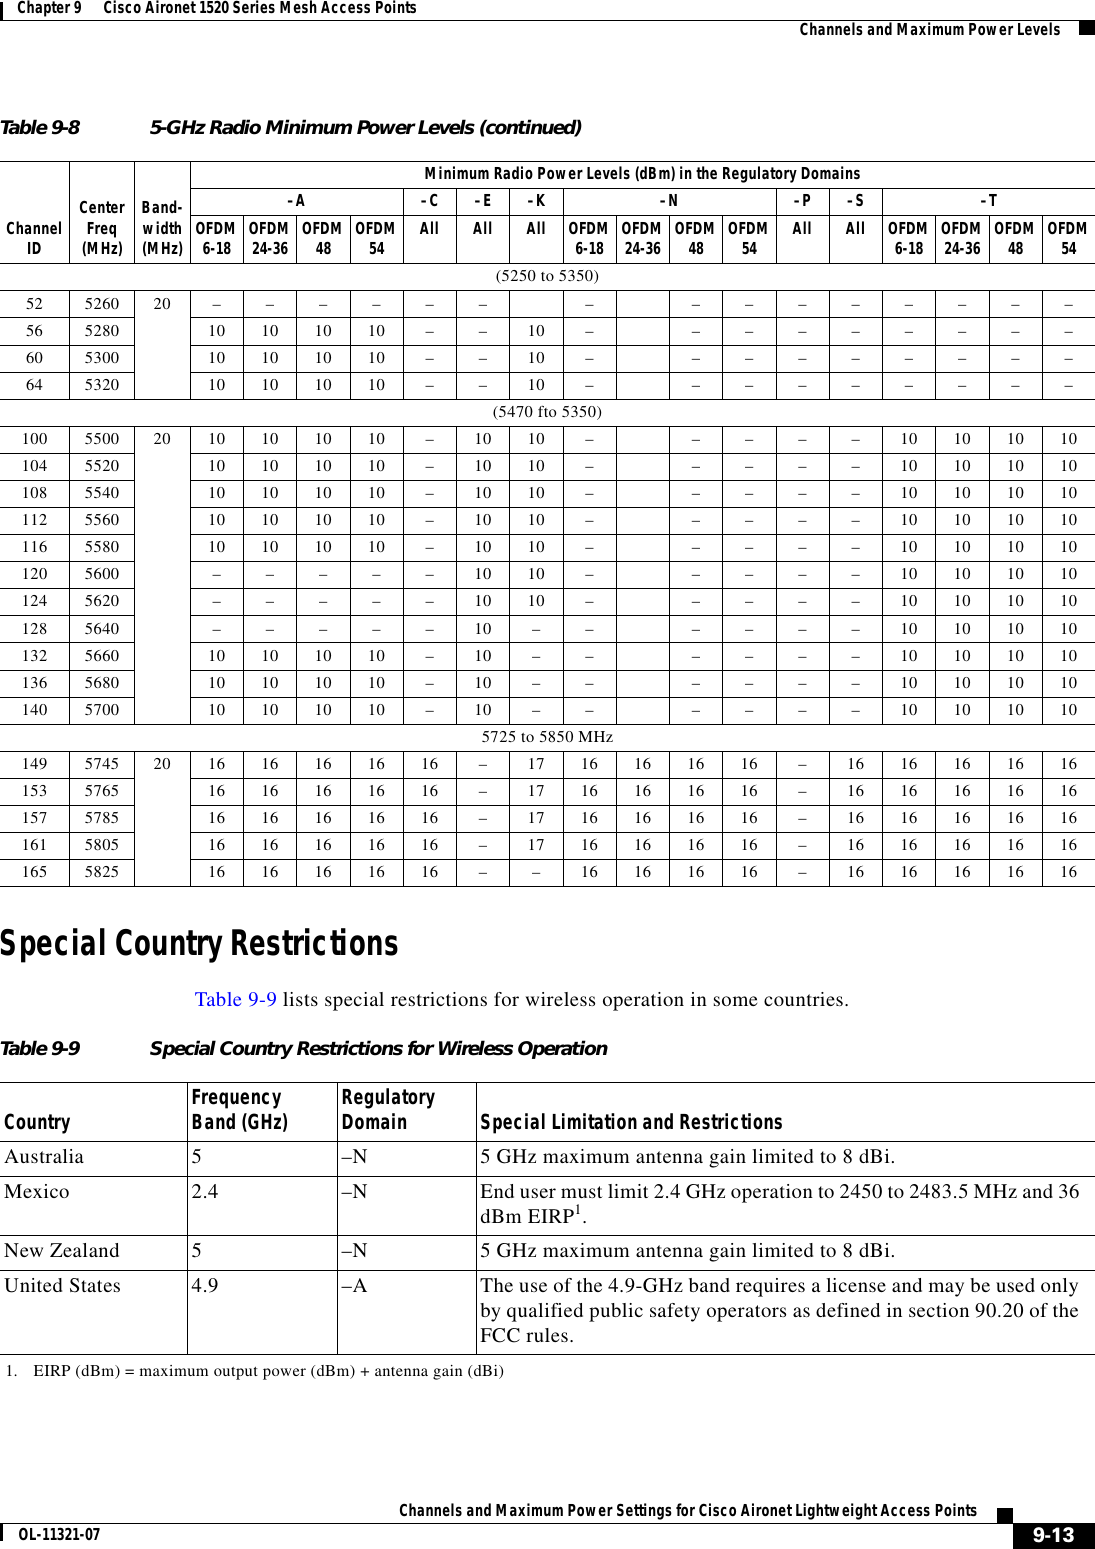  9-13Channels and Maximum Power Settings for Cisco Aironet Lightweight Access PointsOL-11321-07Chapter 9      Cisco Aironet 1520 Series Mesh Access Points   Channels and Maximum Power LevelsSpecial Country RestrictionsTable 9-9 lists special restrictions for wireless operation in some countries. (5250 to 5350)52 5260 20 –––––– – ––––––––56 5280 10 10 10 10 – – 10 – ––––––––60 5300 10 10 10 10 – – 10 – ––––––––64 5320 10 10 10 10 – – 10 – ––––––––(5470 fto 5350)100 5500 20  10 10 10 10 –10 10 – ––––10 10 10 10104 5520 10 10 10 10 –10 10 – ––––10 10 10 10108 5540 10 10 10 10 –10 10 – ––––10 10 10 10112 5560 10 10 10 10 –10 10 – ––––10 10 10 10116 5580 10 10 10 10 –10 10 – ––––10 10 10 10120 5600 –––––10 10 – ––––10 10 10 10124 5620 –––––10 10 – ––––10 10 10 10128 5640 –––––10 –– ––––10 10 10 10132 5660 10 10 10 10 –10 –– ––––10 10 10 10136 5680 10 10 10 10 –10 –– ––––10 10 10 10140 5700 10 10 10 10 –10 –– ––––10 10 10 105725 to 5850 MHz149 5745 20 16 16 16 16 16 –17 16 16 16 16 –16 16 16 16 16153 5765 16 16 16 16 16 –17 16 16 16 16 –16 16 16 16 16157 5785 16 16 16 16 16 –17 16 16 16 16 –16 16 16 16 16161 5805 16 16 16 16 16 –17 16 16 16 16 –16 16 16 16 16165 5825 16 16 16 16 16 – – 16 16 16 16 –16 16 16 16 16Table 9-8 5-GHz Radio Minimum Power Levels (continued)ChannelIDCenter Freq(MHz)Band-width(MHz)Minimum Radio Power Levels (dBm) in the Regulatory Domains–A –C –E –K –N –P –S –TOFDM6-18  OFDM24-36 OFDM48  OFDM54  All All All OFDM6-18  OFDM24-36 OFDM48  OFDM54  All All OFDM6-18  OFDM24-36 OFDM48  OFDM54 Table 9-9 Special Country Restrictions for Wireless OperationCountry Frequency Band (GHz) Regulatory Domain Special Limitation and RestrictionsAustralia 5  –N 5 GHz maximum antenna gain limited to 8 dBi.Mexico 2.4  –N End user must limit 2.4 GHz operation to 2450 to 2483.5 MHz and 36 dBm EIRP1.1. EIRP (dBm) = maximum output power (dBm) + antenna gain (dBi)New Zealand 5  –N 5 GHz maximum antenna gain limited to 8 dBi.United States 4.9  –A The use of the 4.9-GHz band requires a license and may be used only by qualified public safety operators as defined in section 90.20 of the FCC rules.